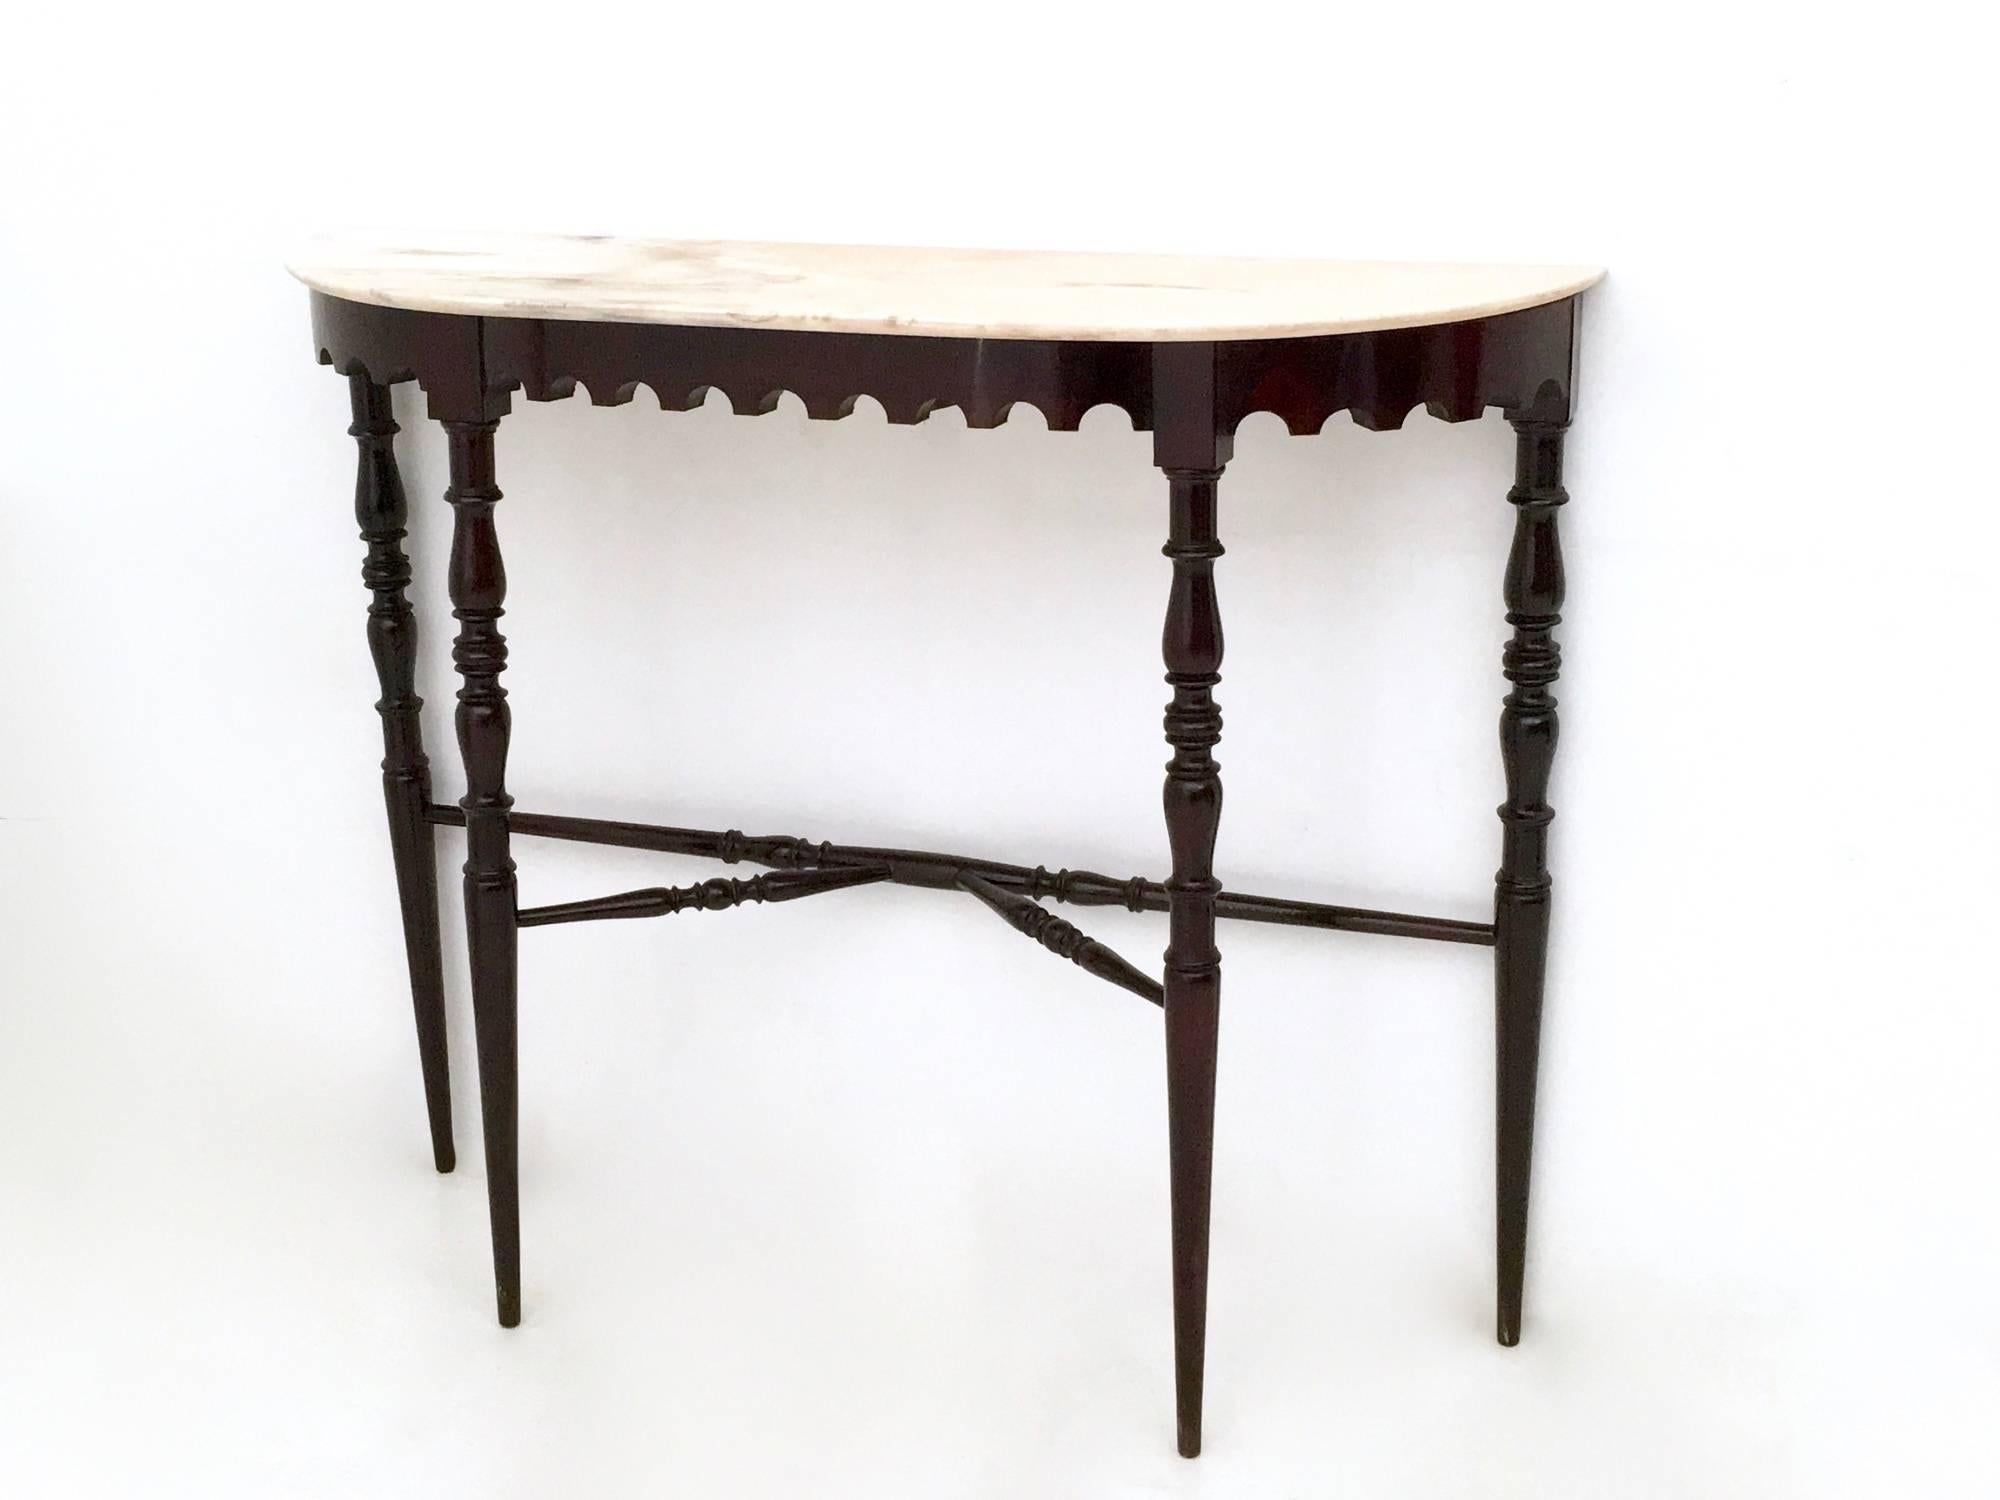 It is made in ebonized beech and features a Portuguese pink marble top.
In excellent original condition and ready to become a piece in a home. 

Measures: Width: 102 cm 
Depth: 30 cm 
Height: 84 cm.